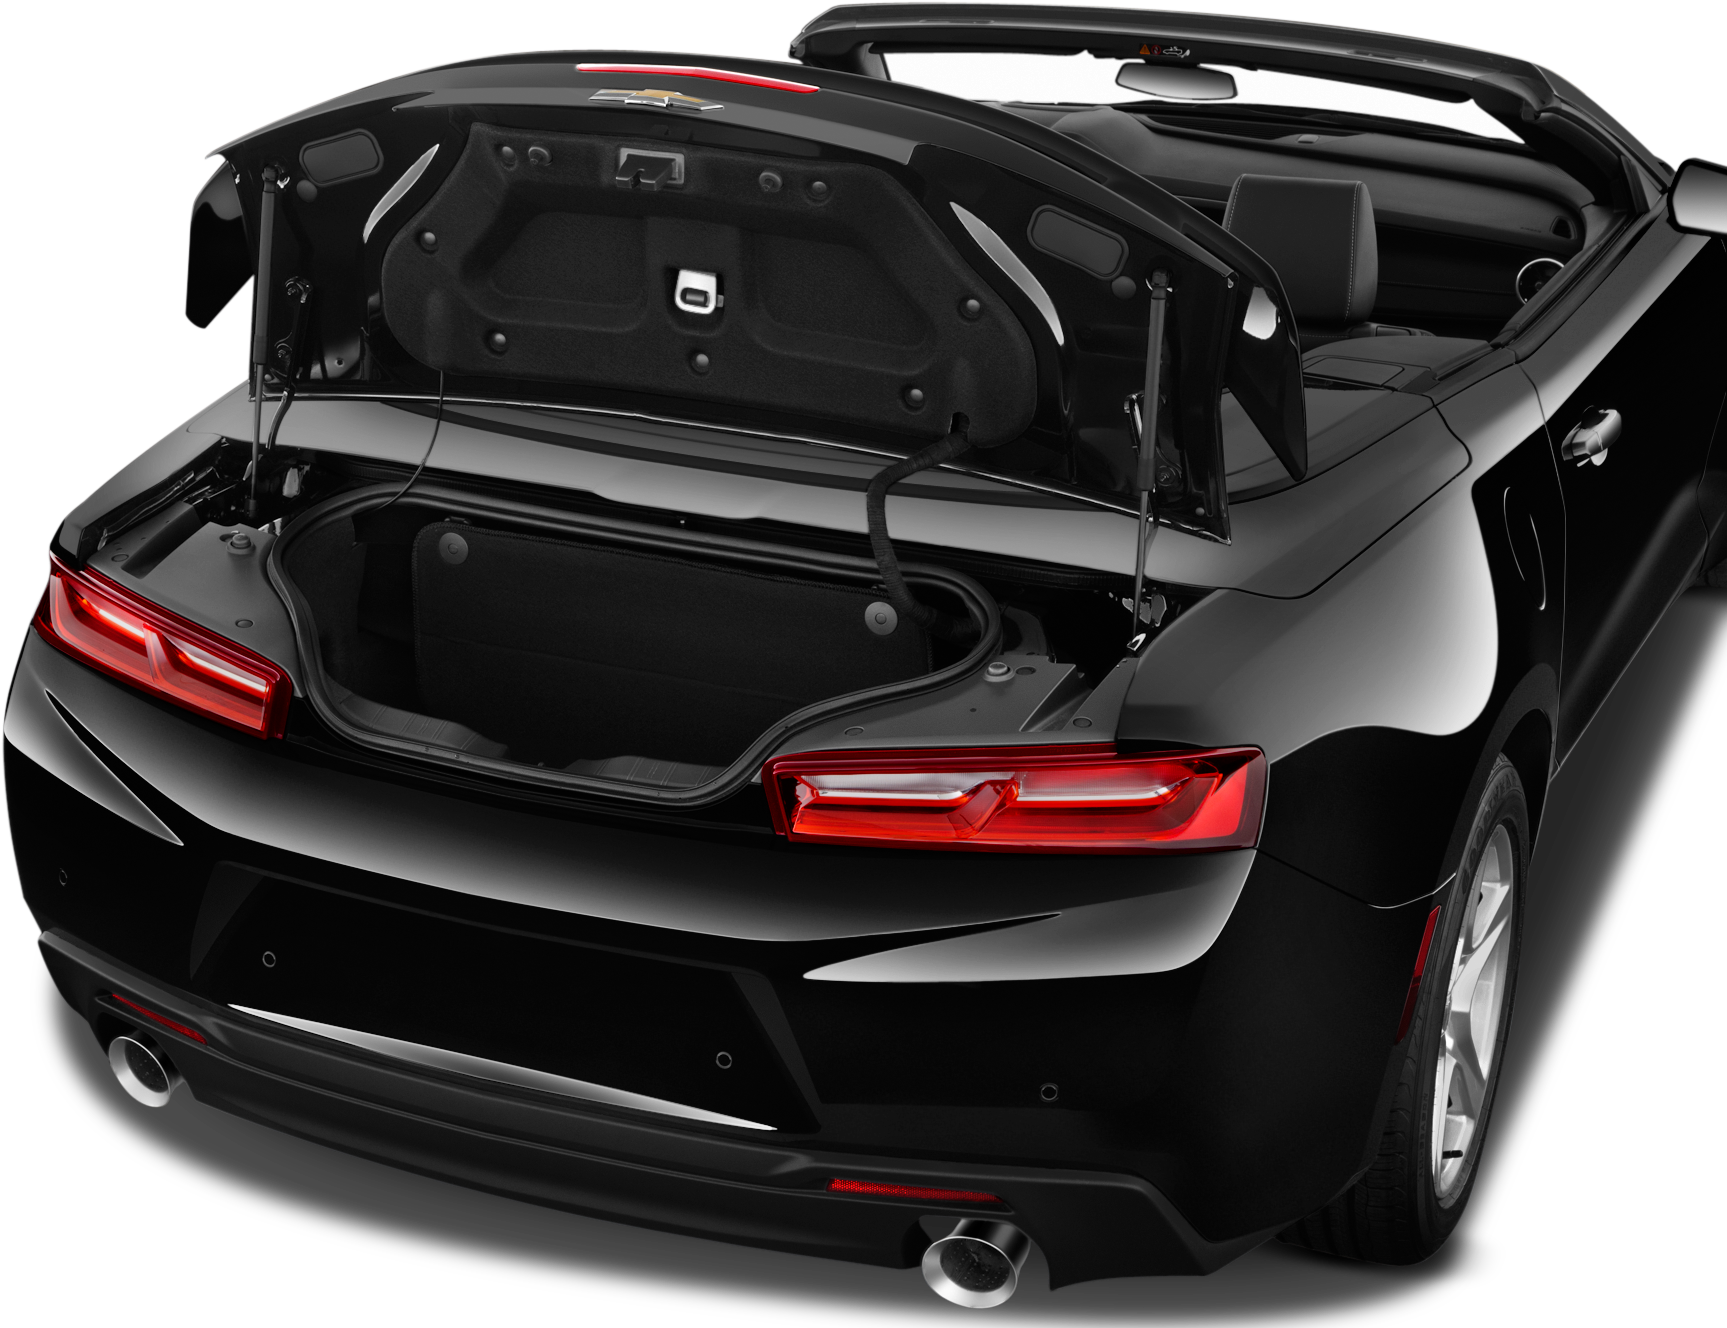 Chevy Camaro 2018 Trunk, Hd Png Download